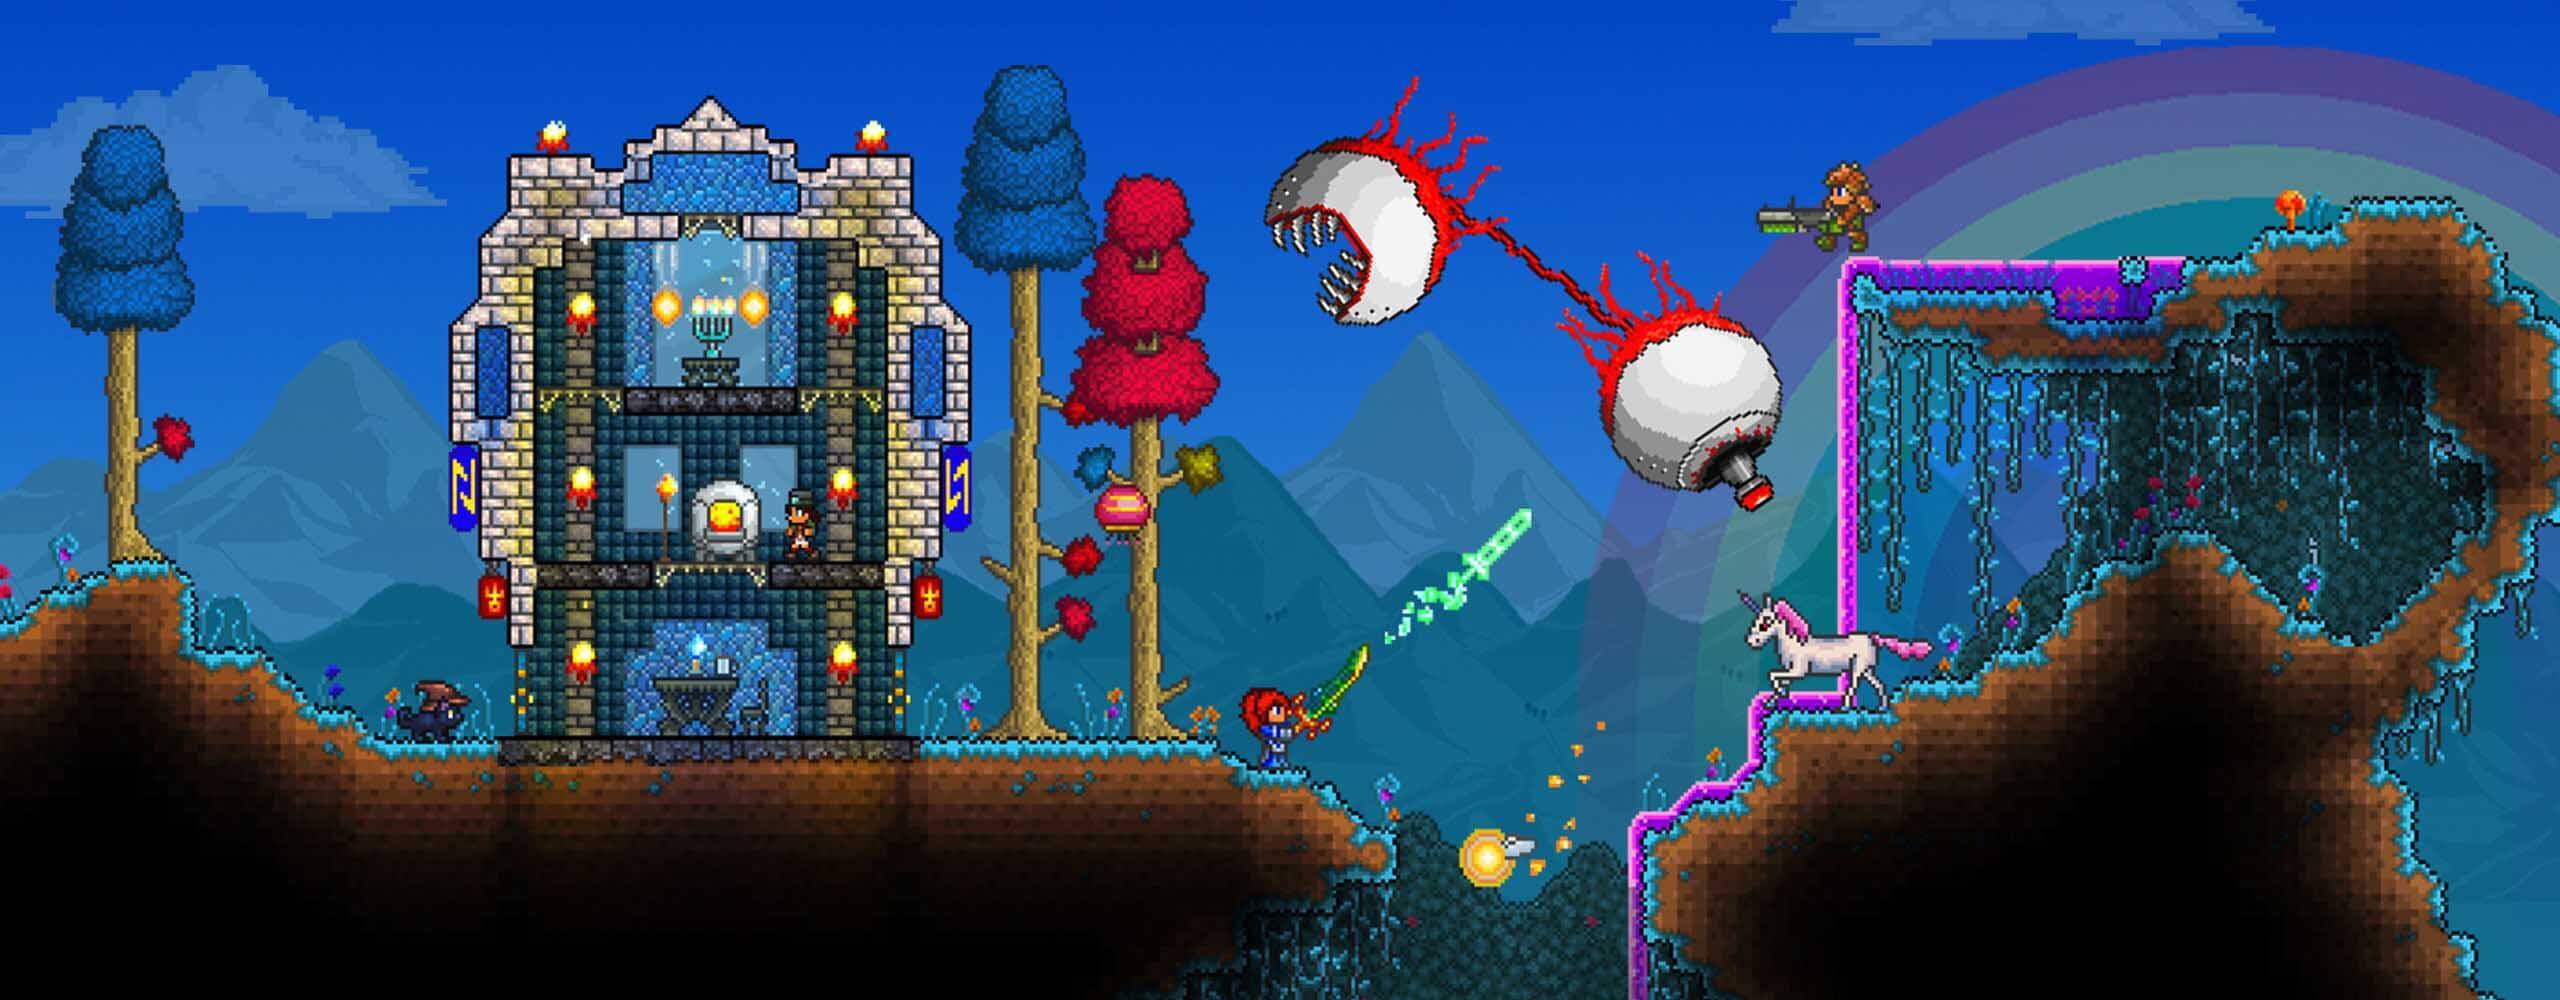 Terraria modded character download for pc